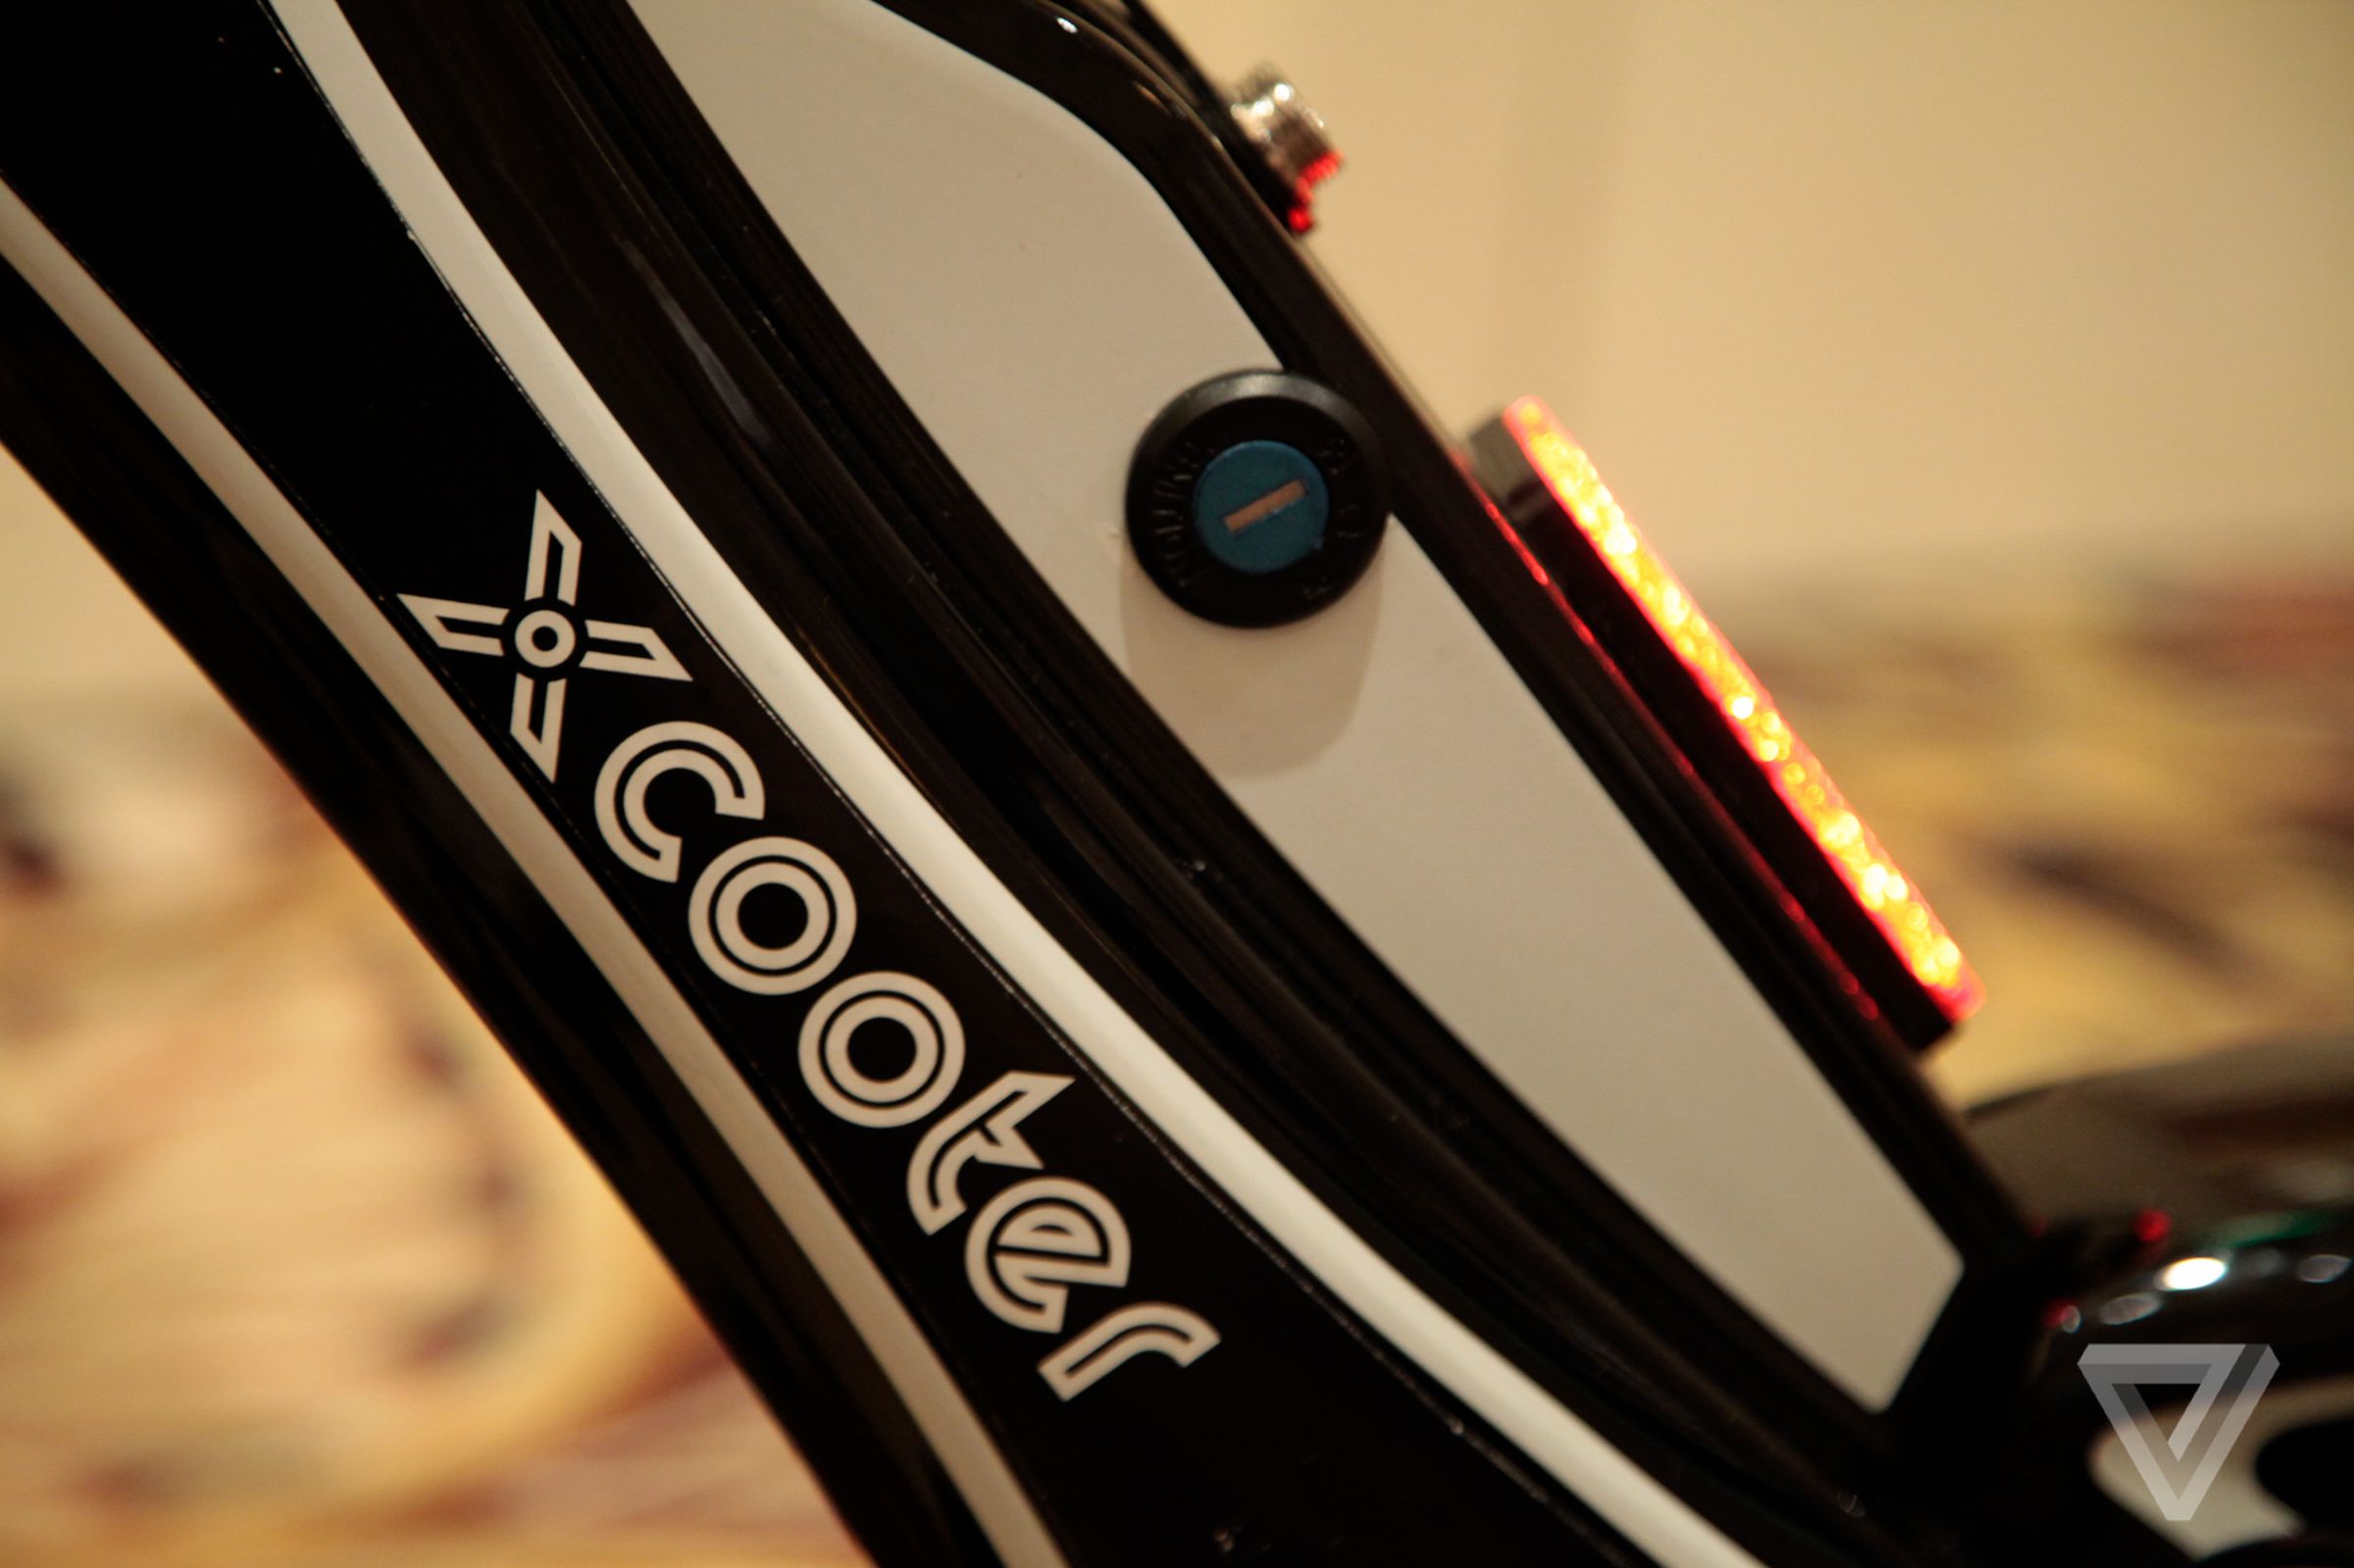 The Xcooter portable scooter